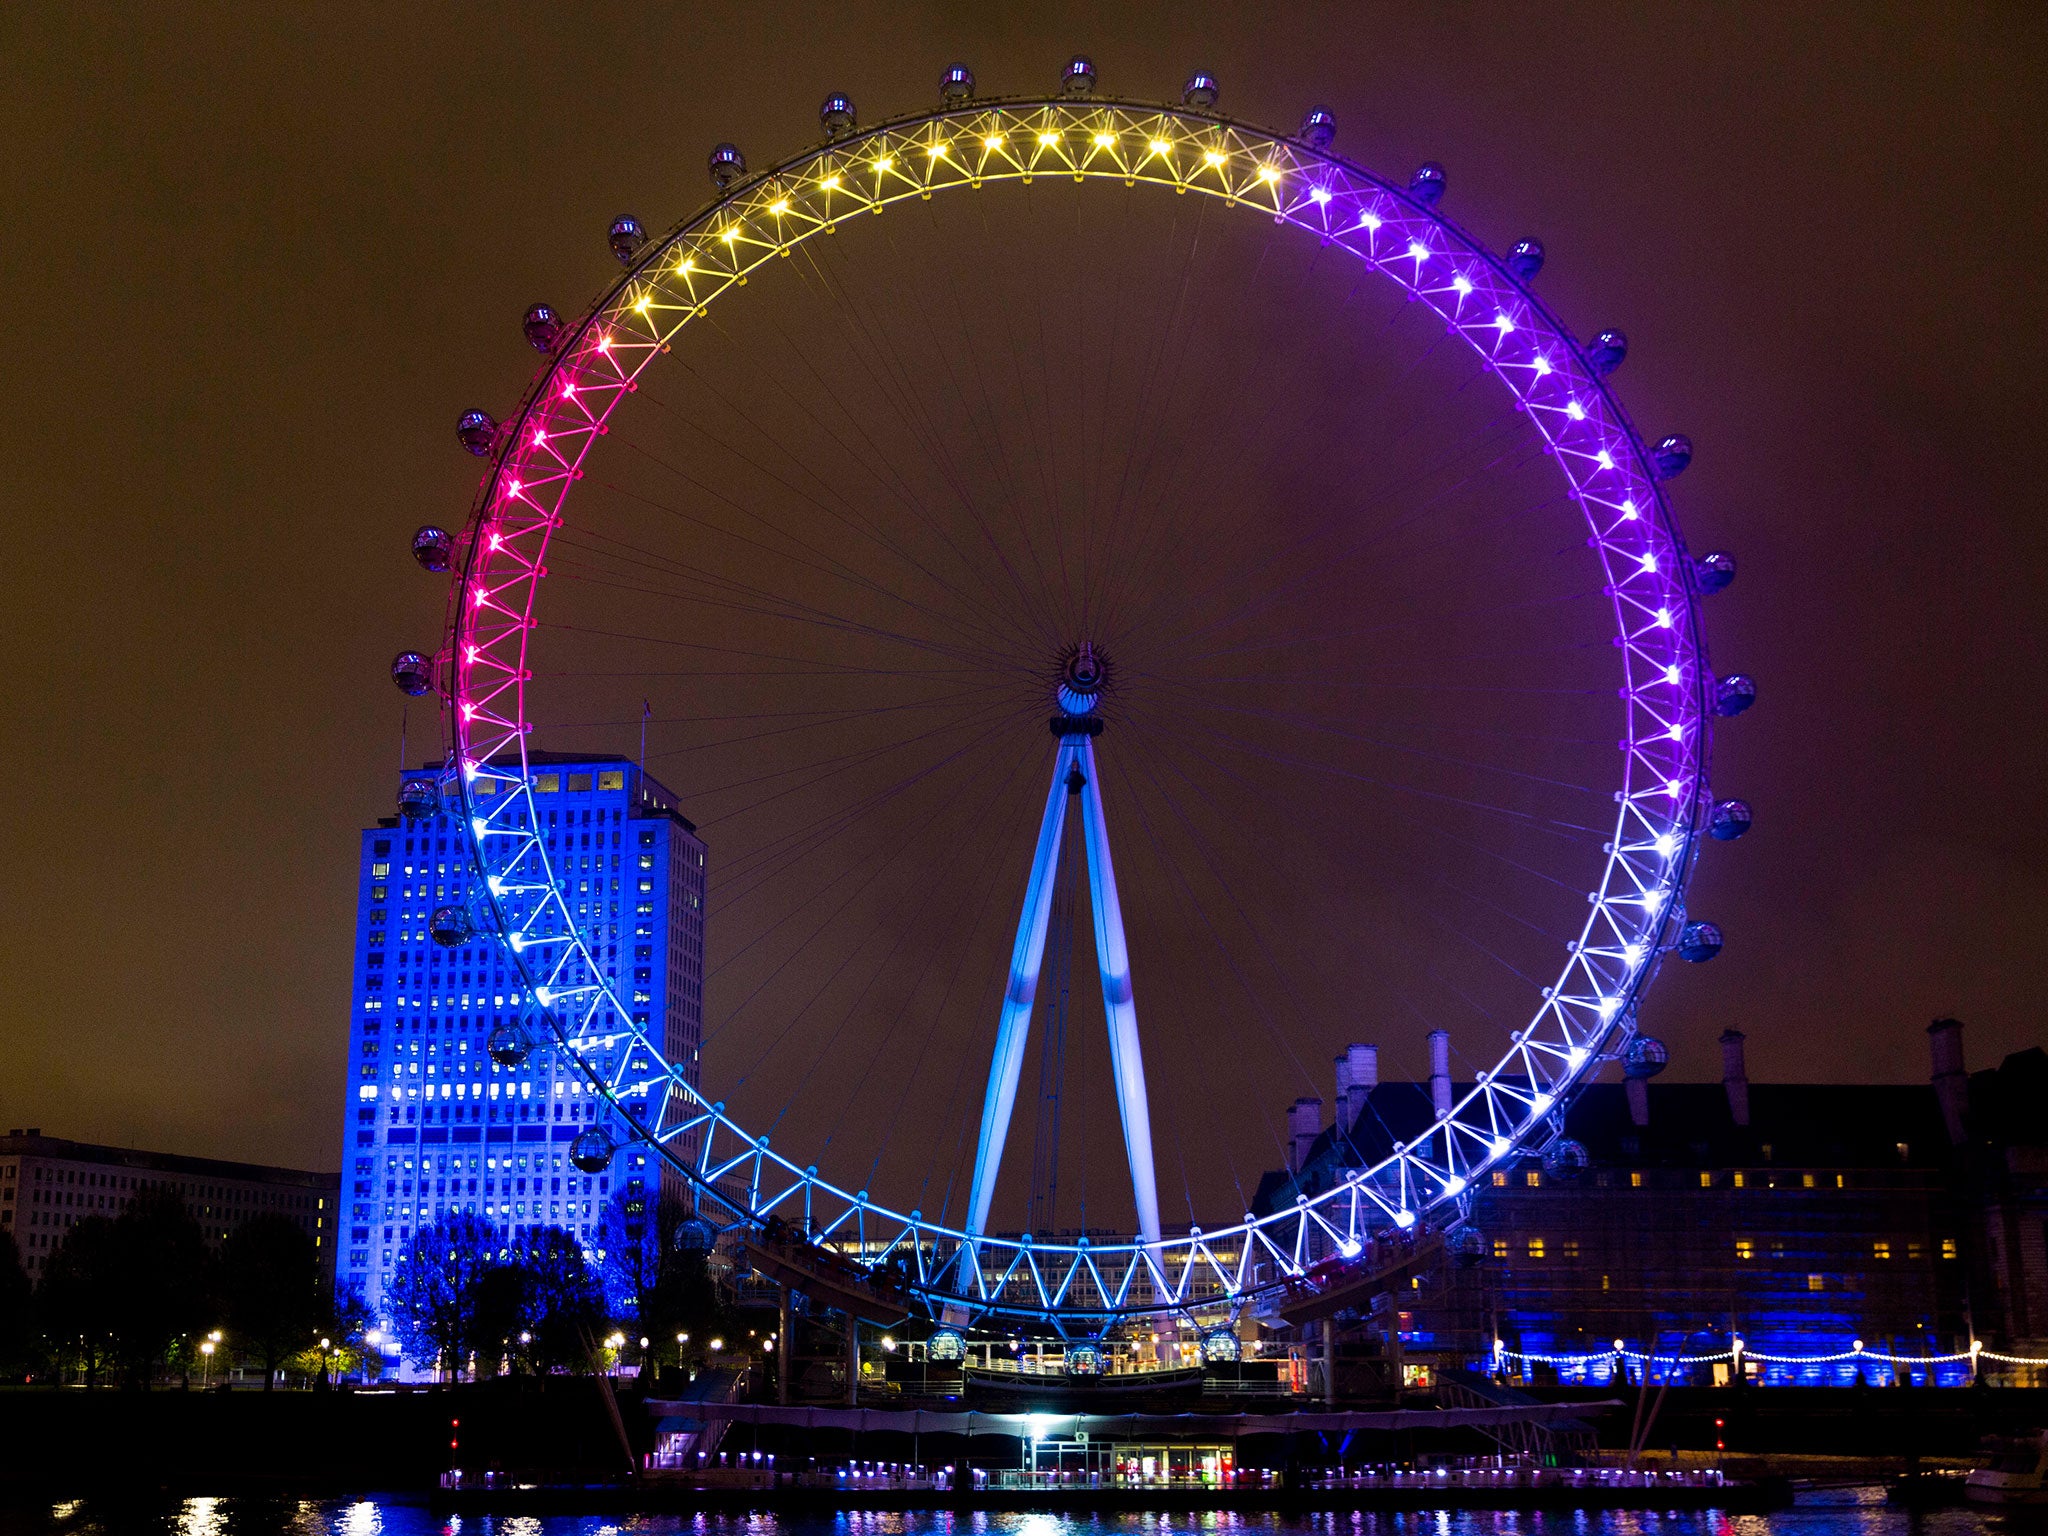 Facebook lights up the London Eye with the nation's general election conversations.The London Eye showed the top five most discussed political topics on Facebook. (Colours: Economy - white; Health - purple; Tax - yellow; Europe and Immigration - blue; Cri